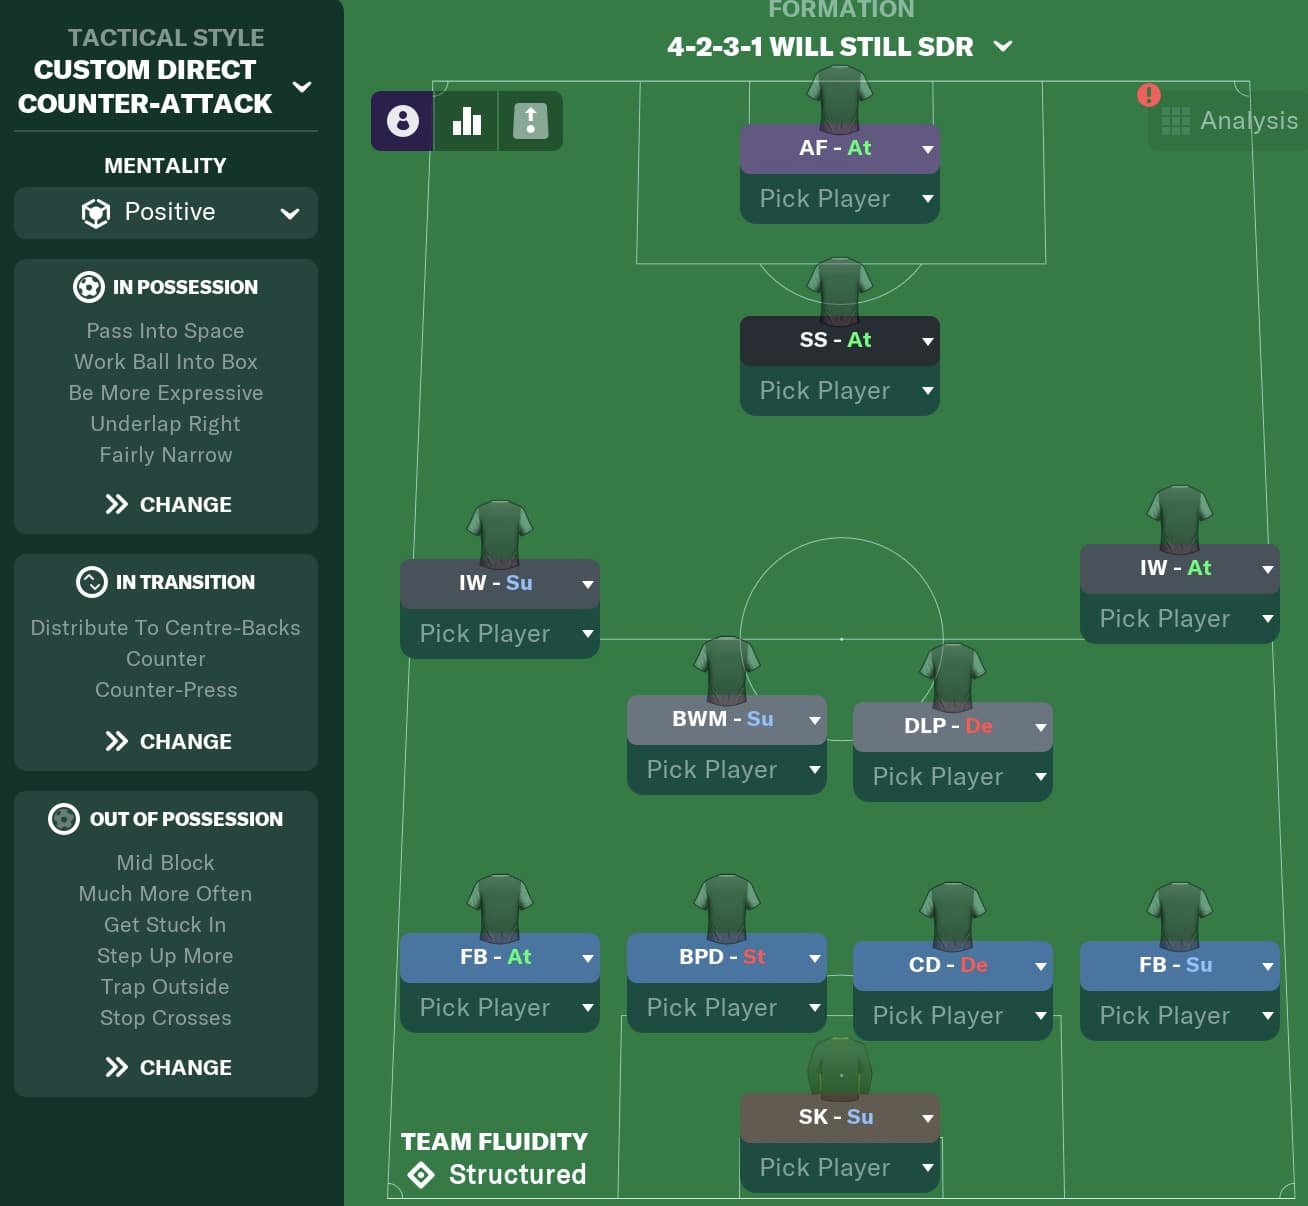 UD Almeria – FM23 Tactic - View From The Touchline